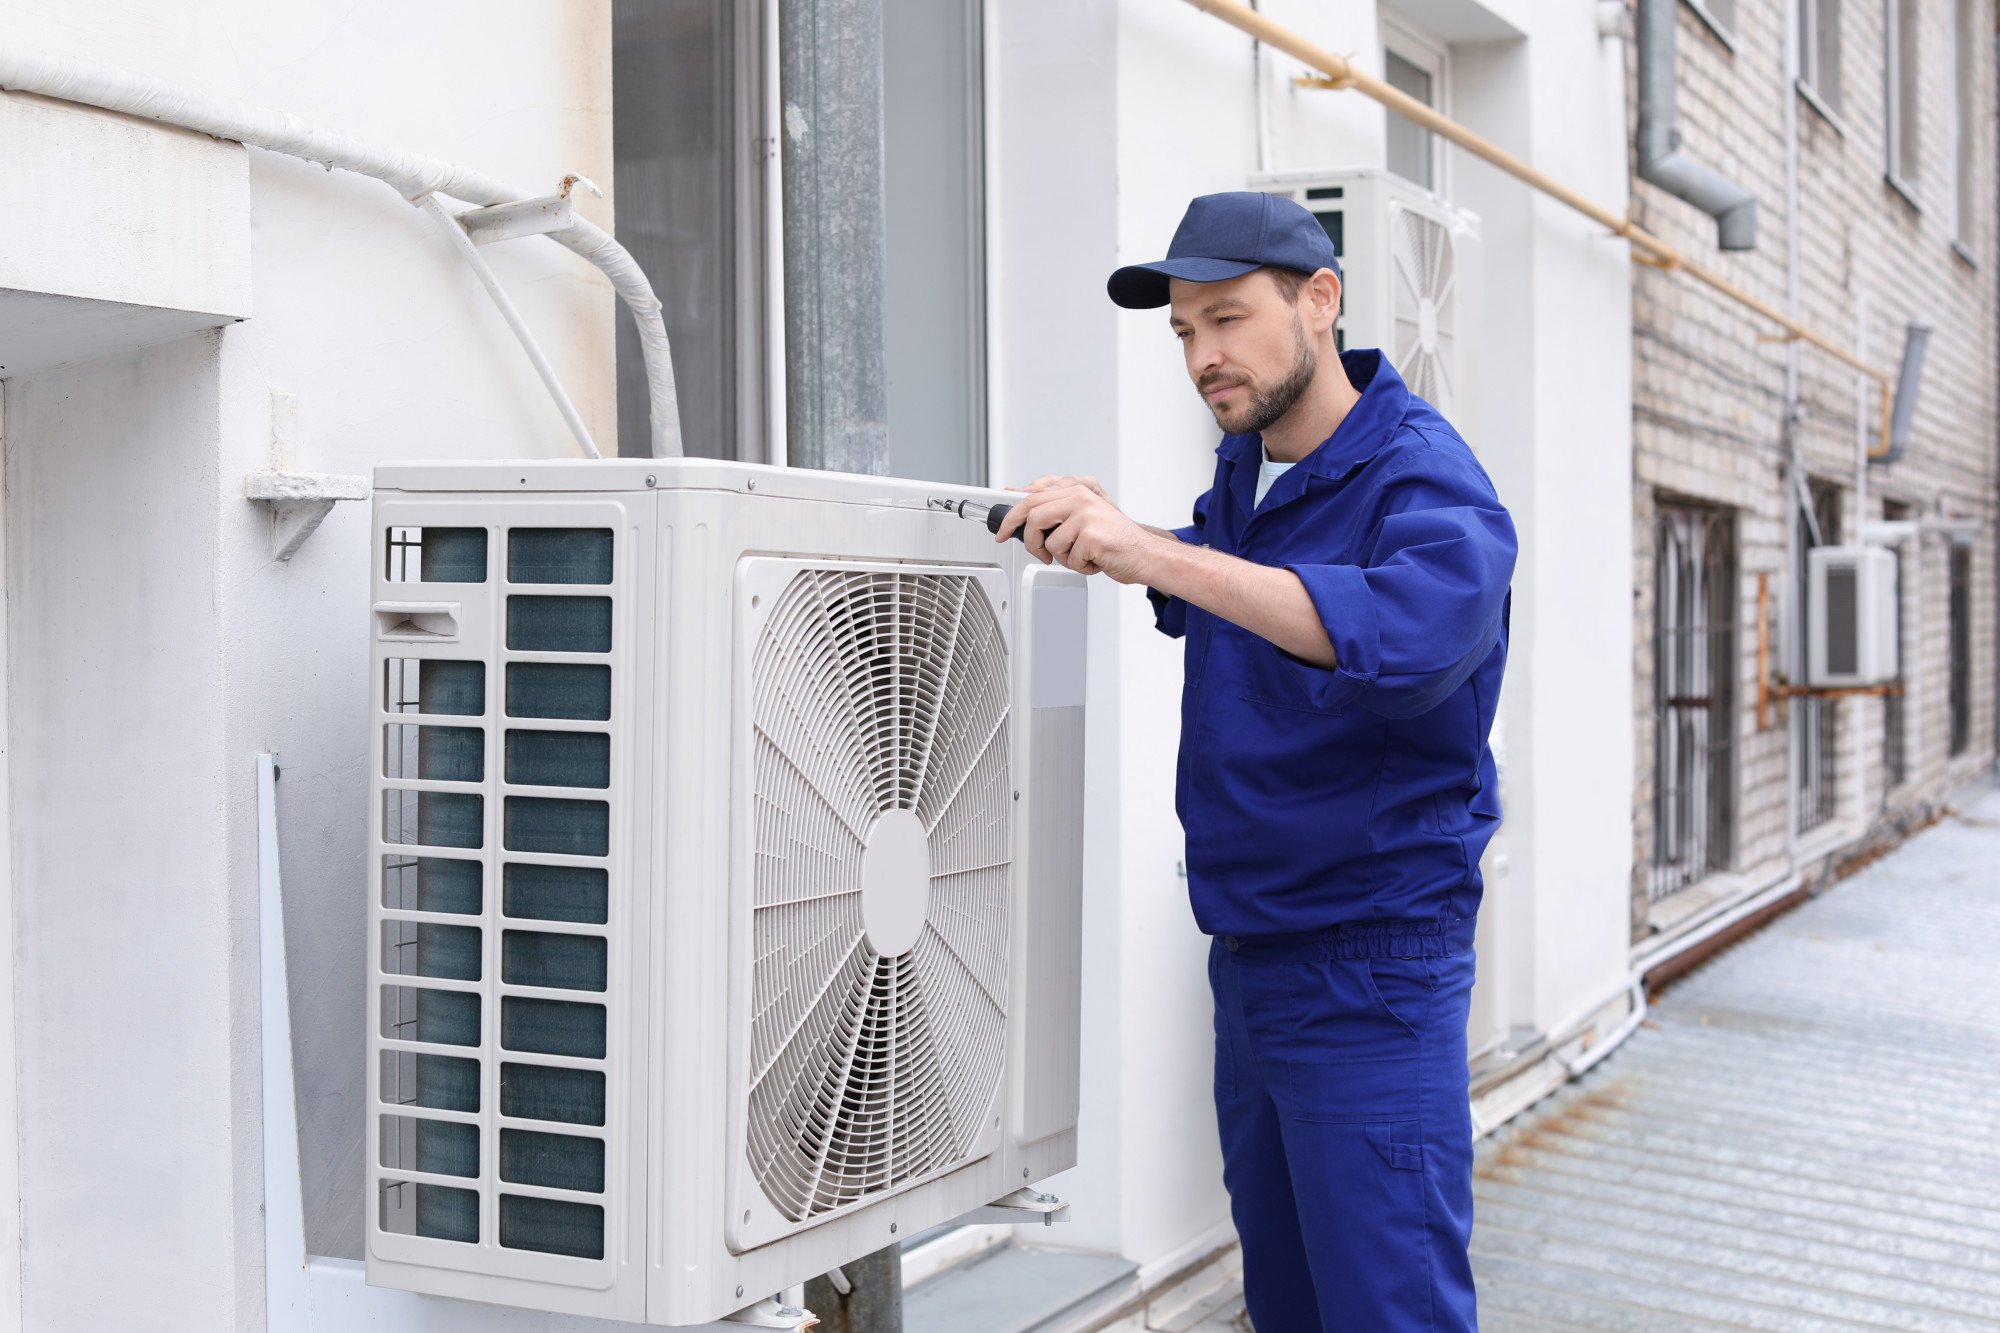 Getting your commercial air conditioning installation right the first time is vitally important. Make sure you avoid these eight installation mistakes.